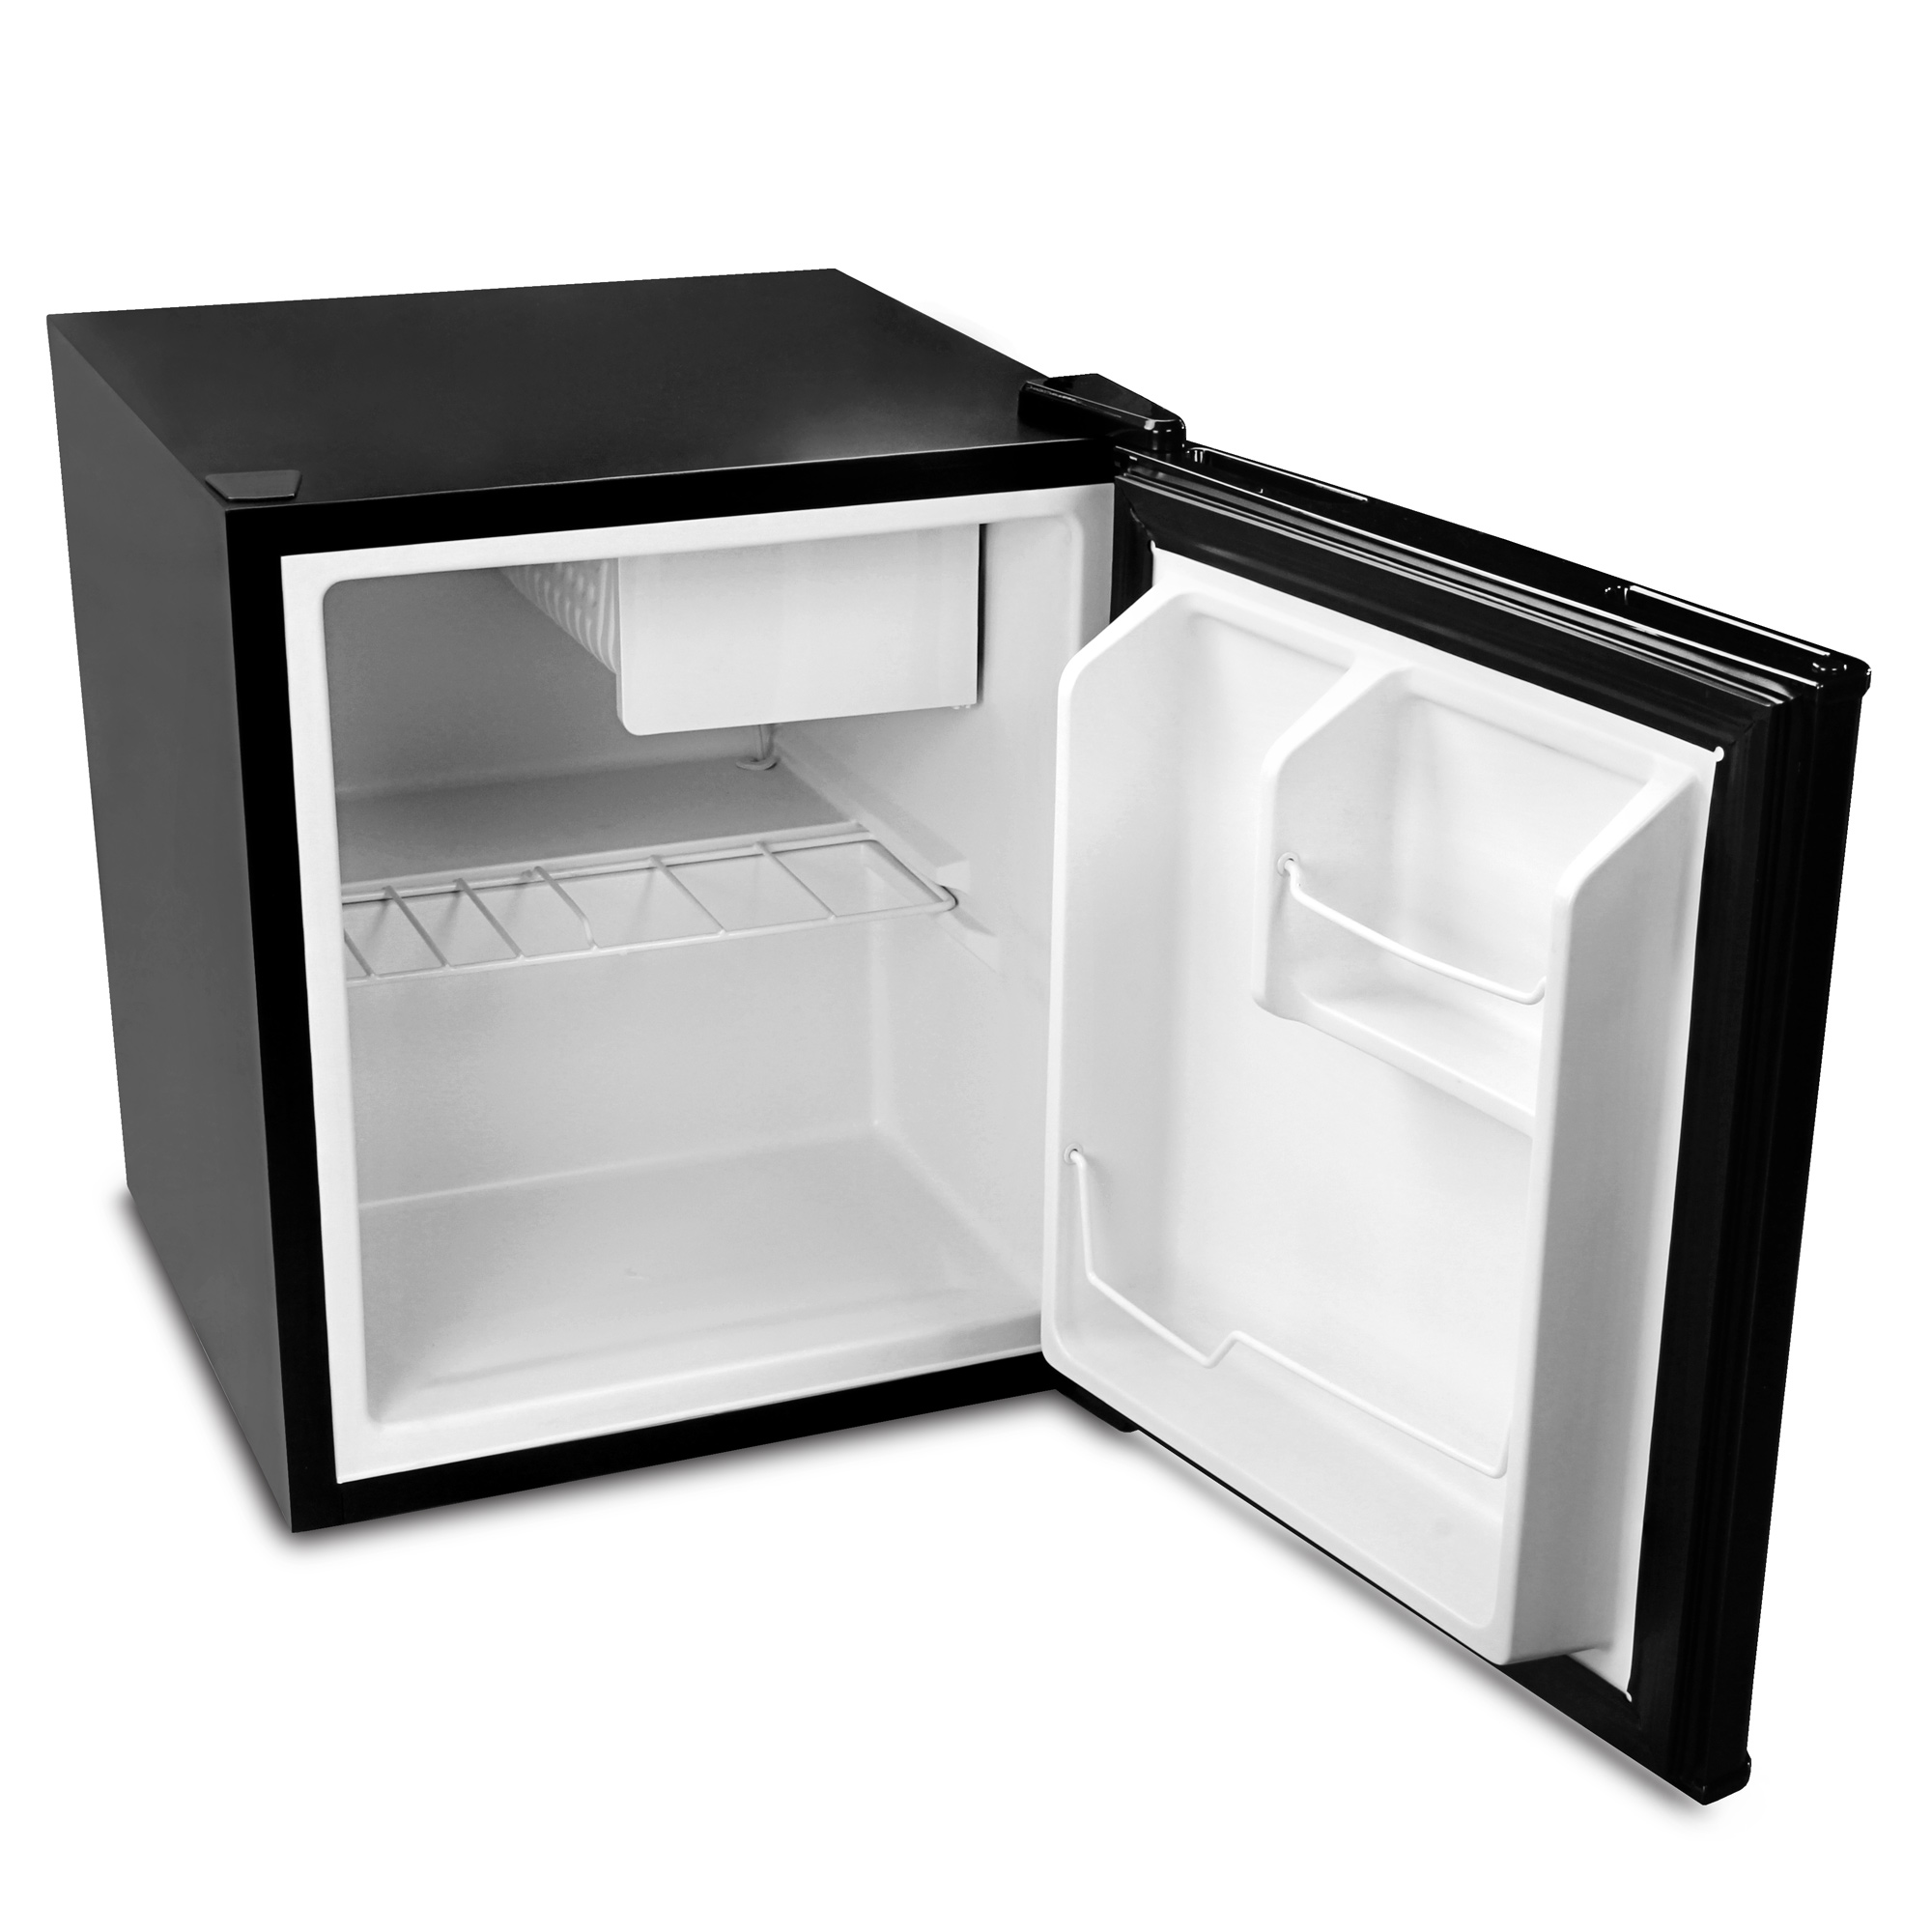 Mini fridge with ice tray compartment - general for sale - by owner -  craigslist